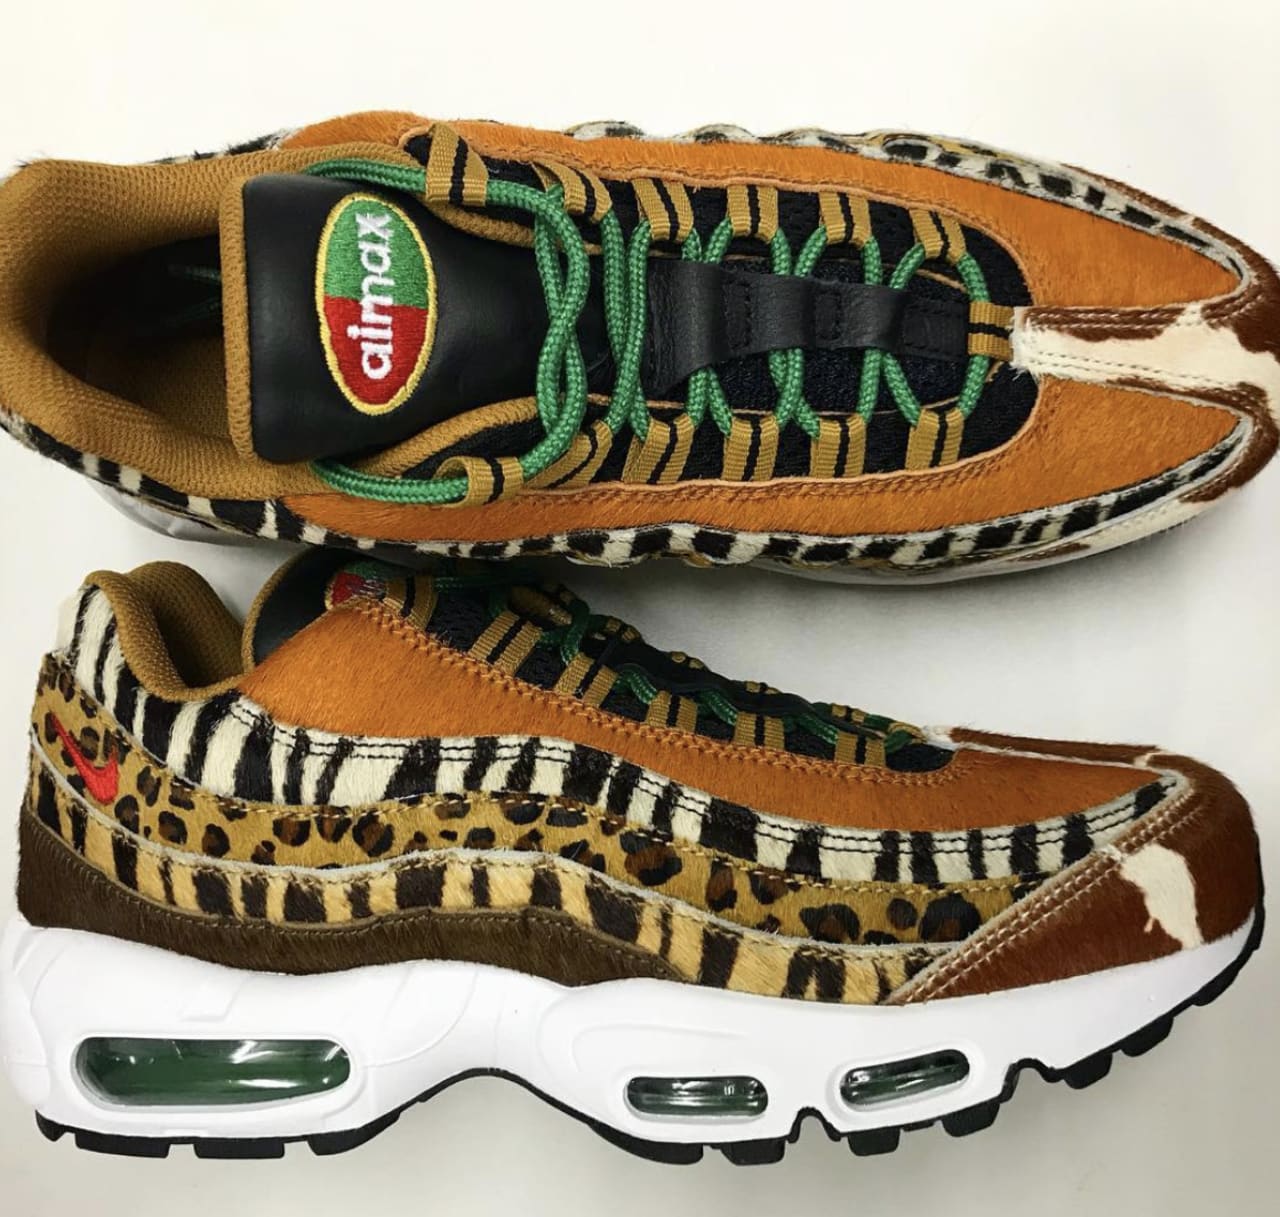 Qué Destructivo Disparo Atmos x Nike Air Max 1 Animal Pack 3.0 Friends and Family | Sole Collector